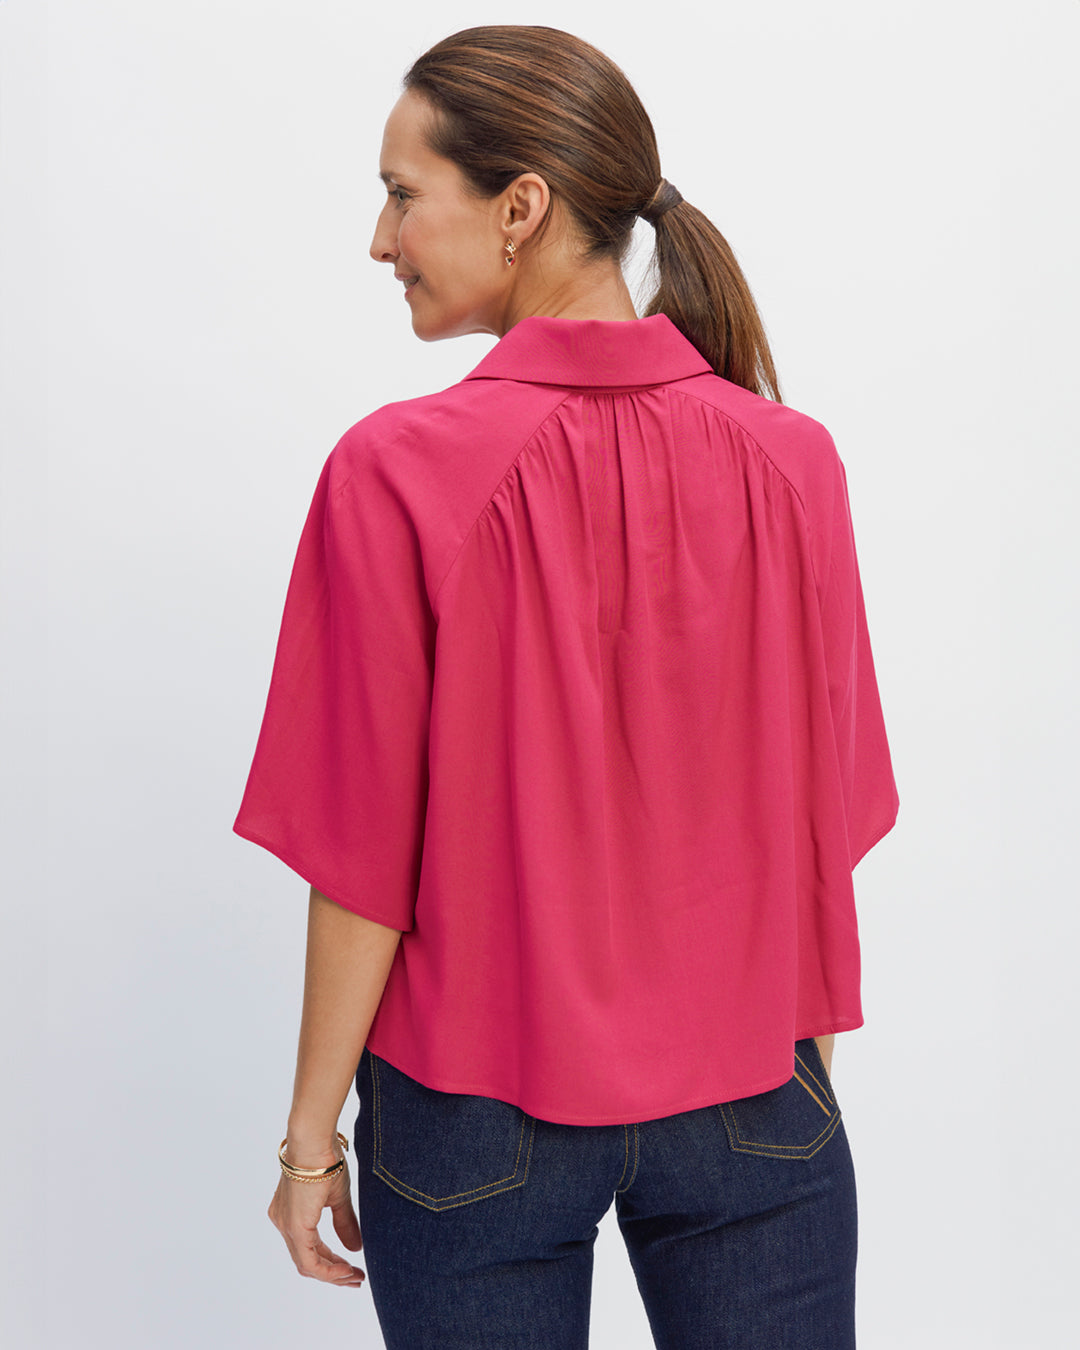 blouse-pink-collar-blouse-sleeves-raglan-button-placket-cache-fronces-front-and-back-17H10-tailleurs-for-women-paris-